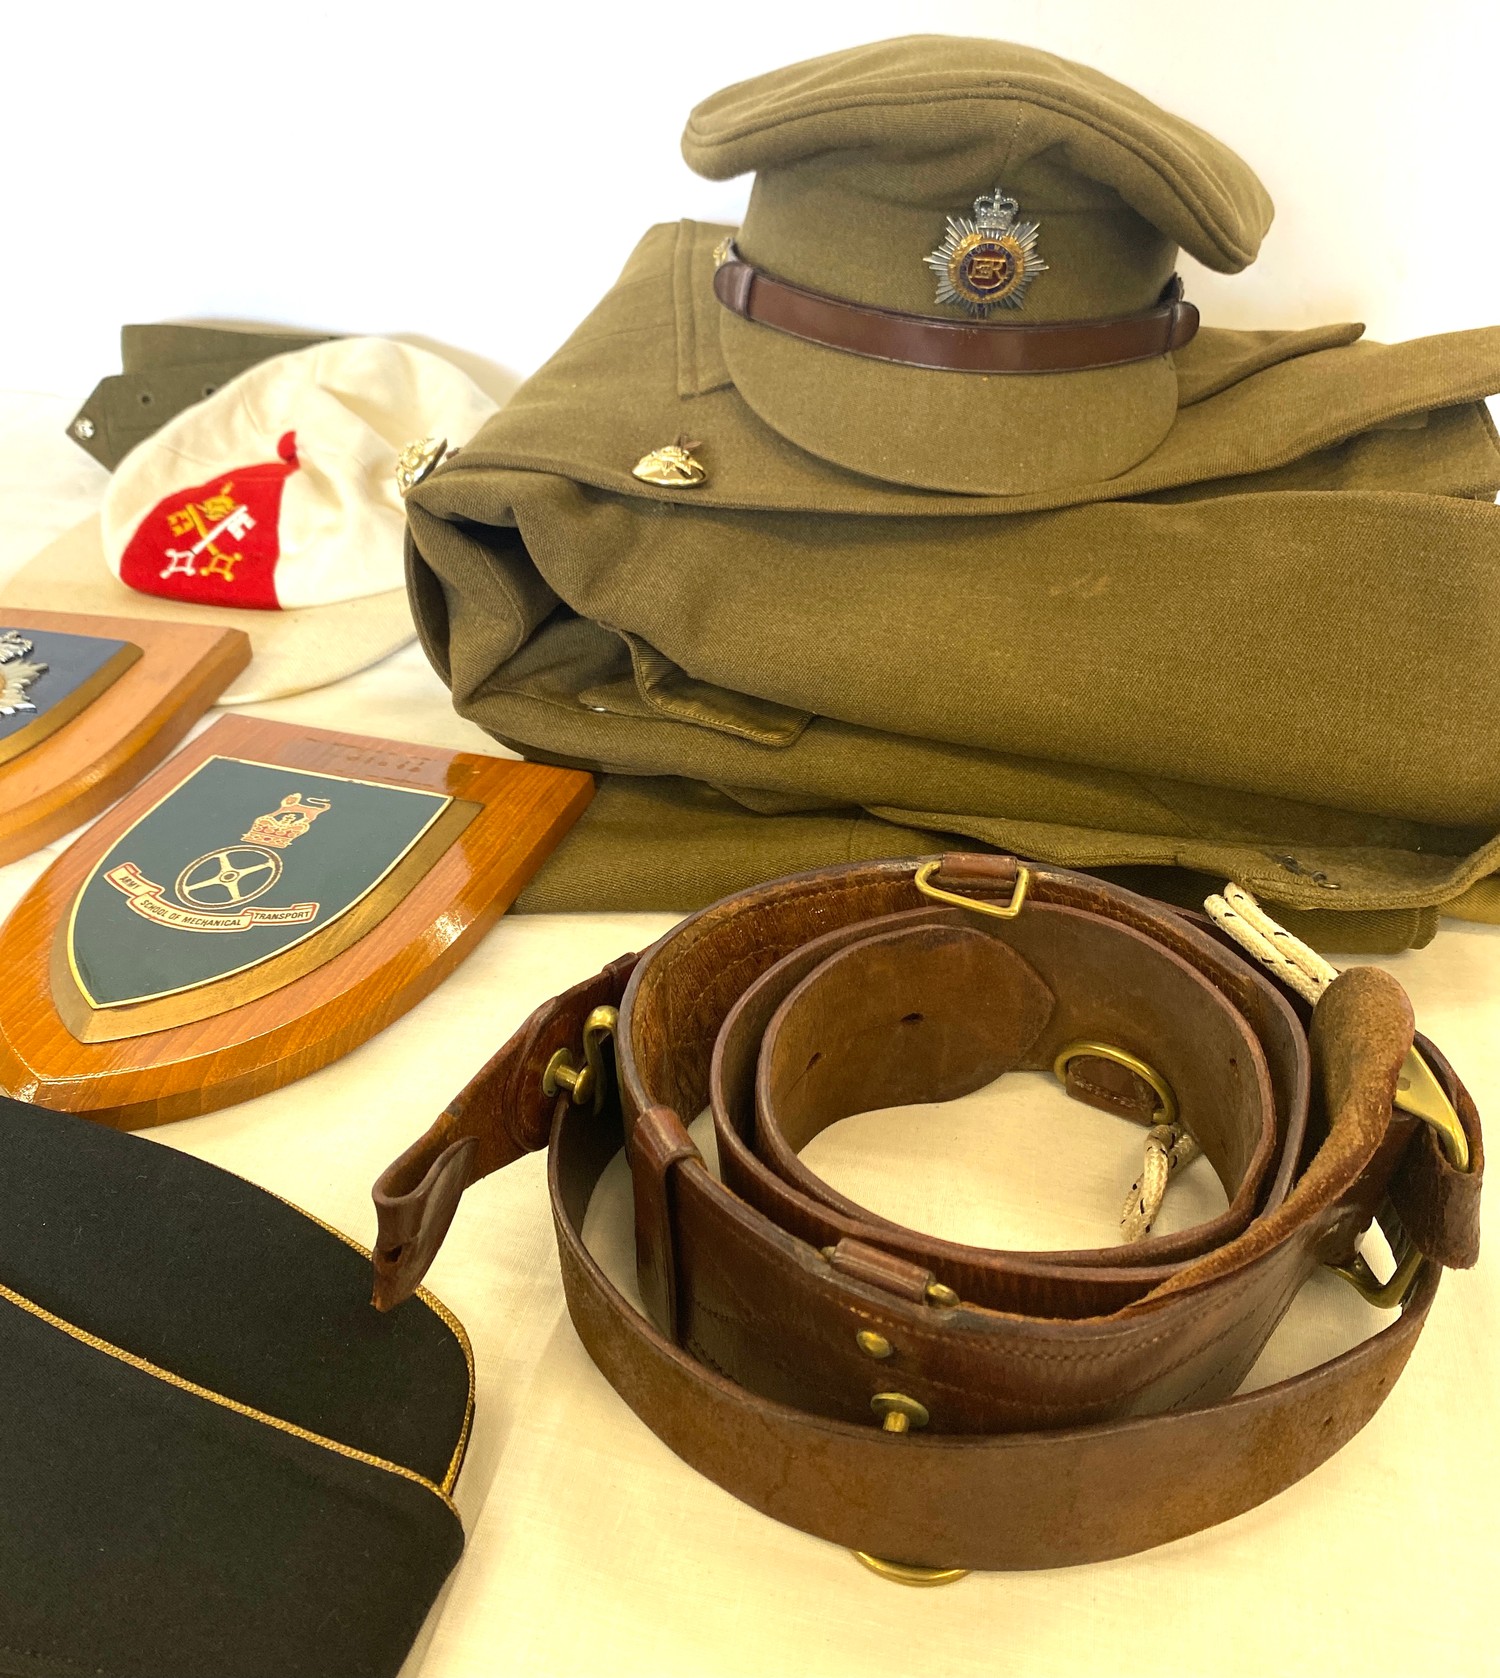 Army uniform with cap and sam brown belt - Image 4 of 4